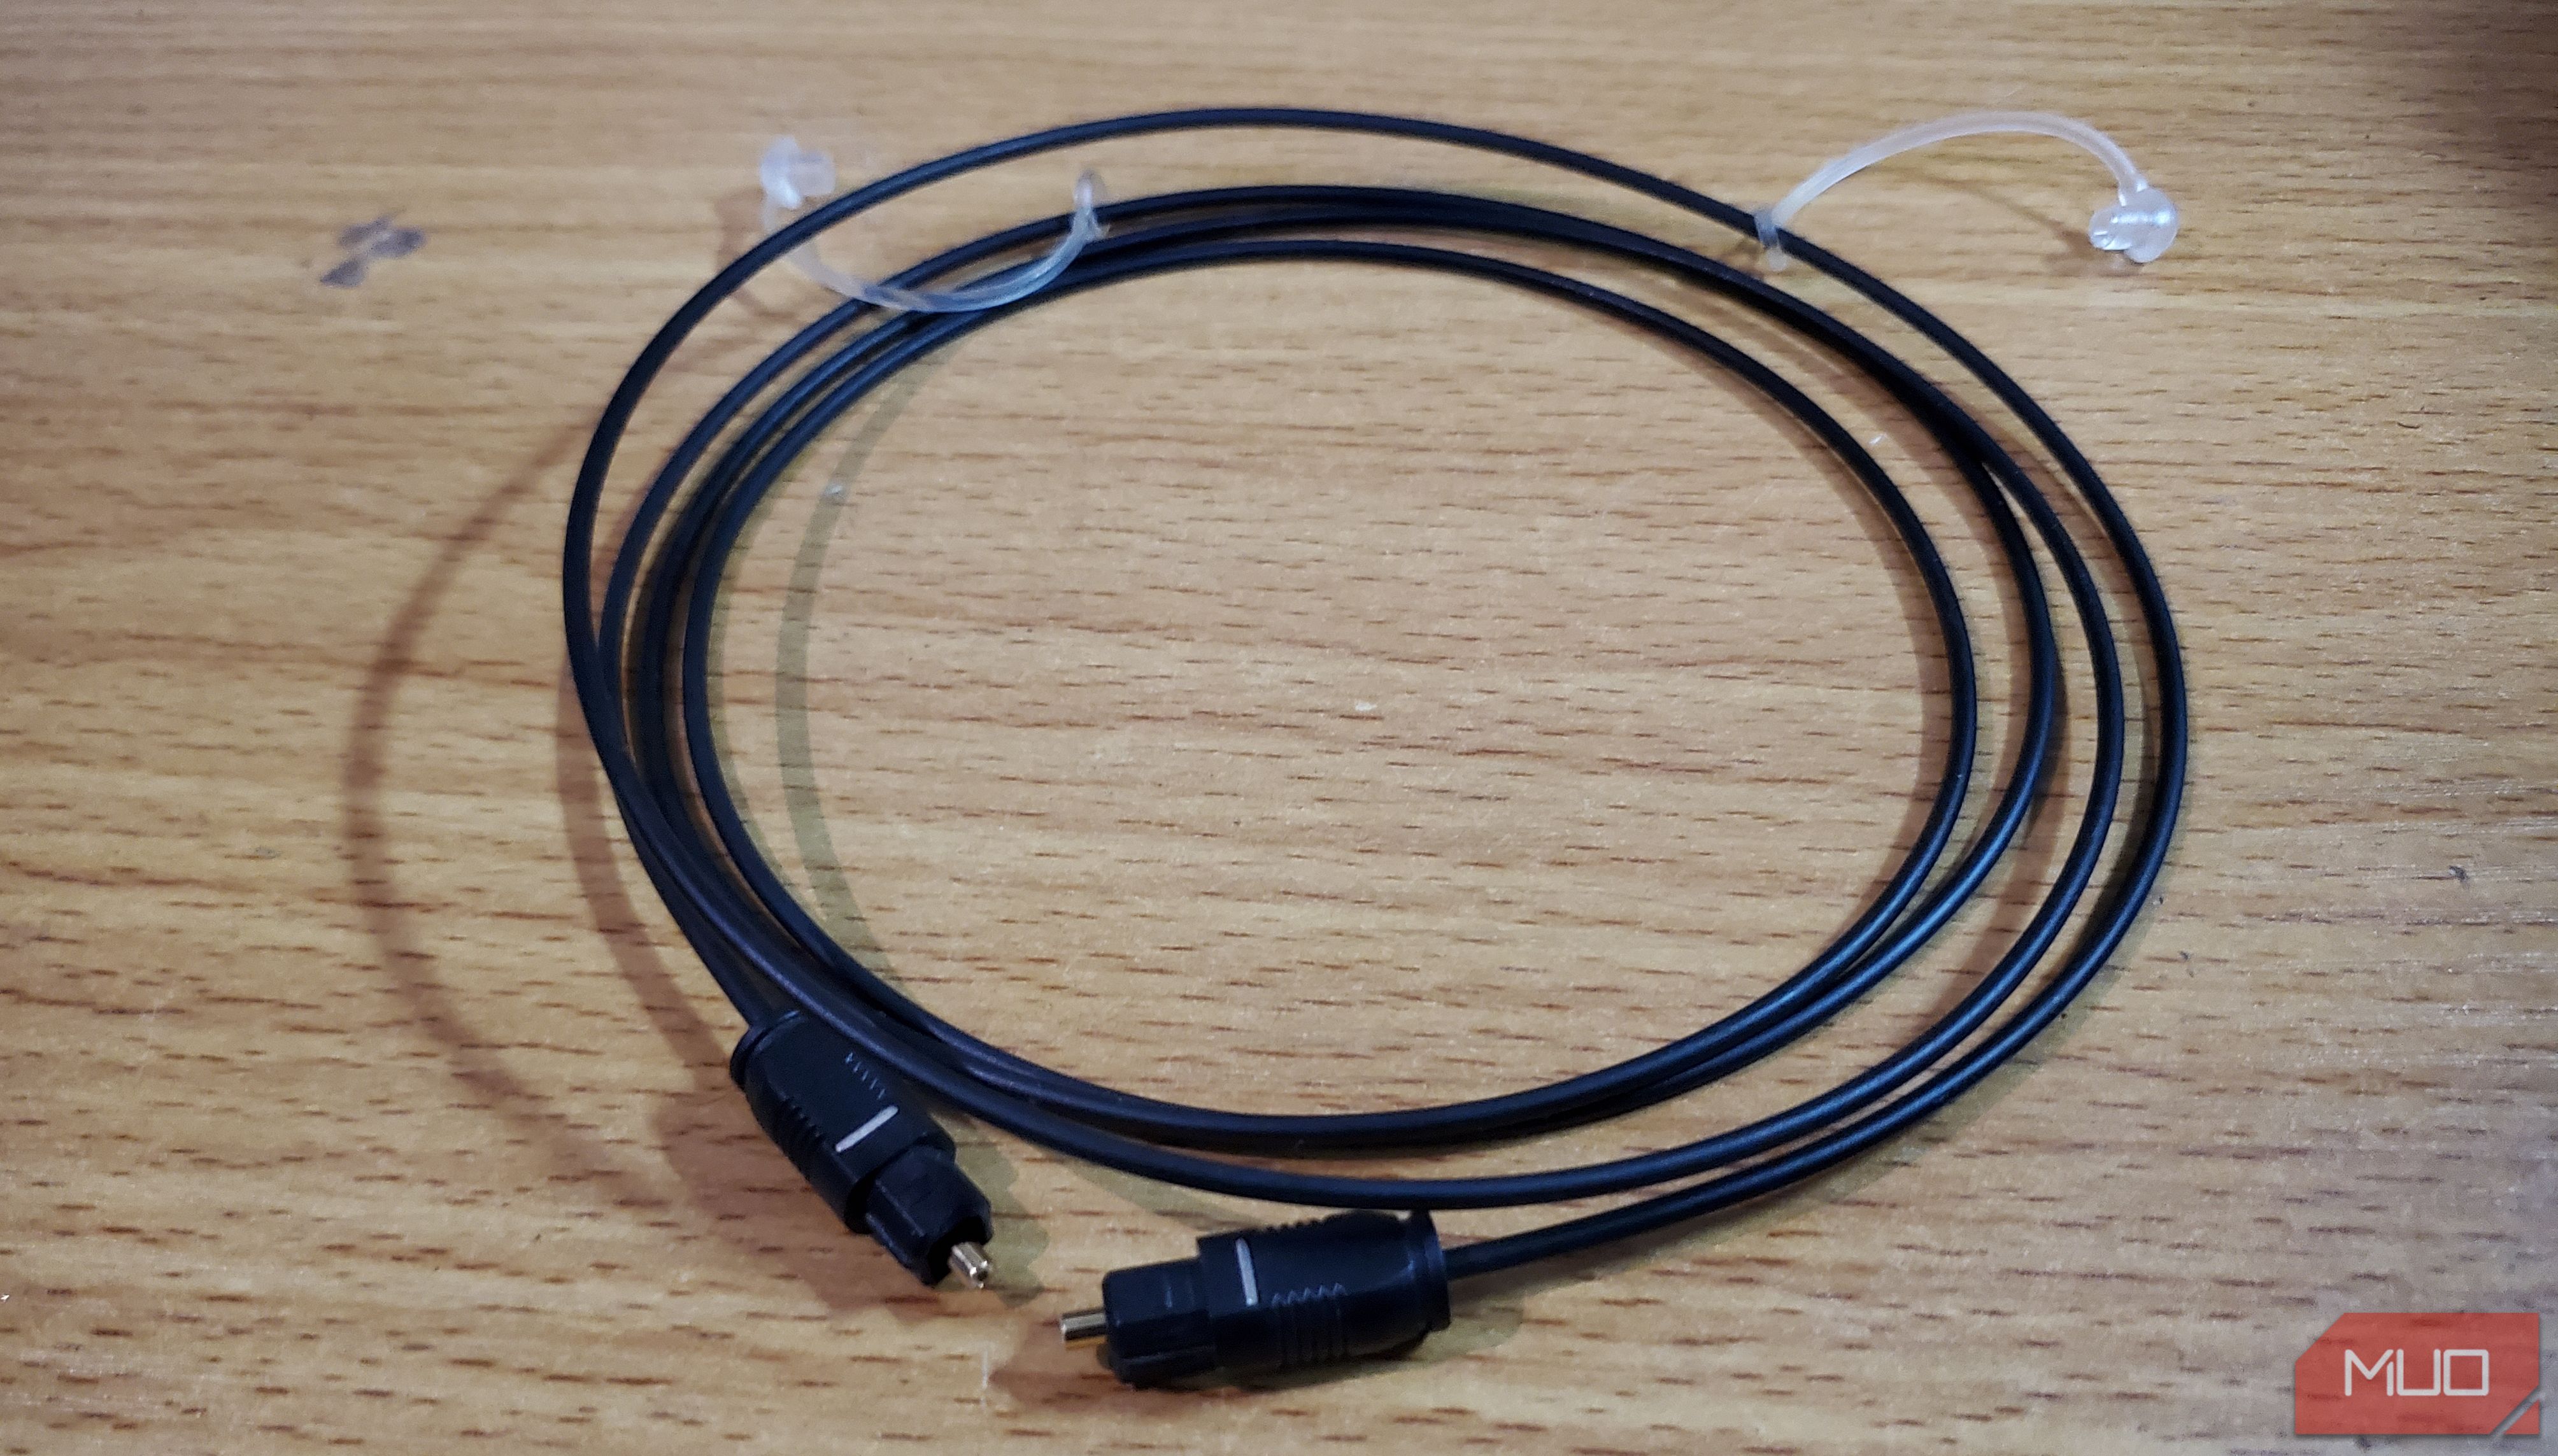 An optical cable for connecting a soundbar to a TV